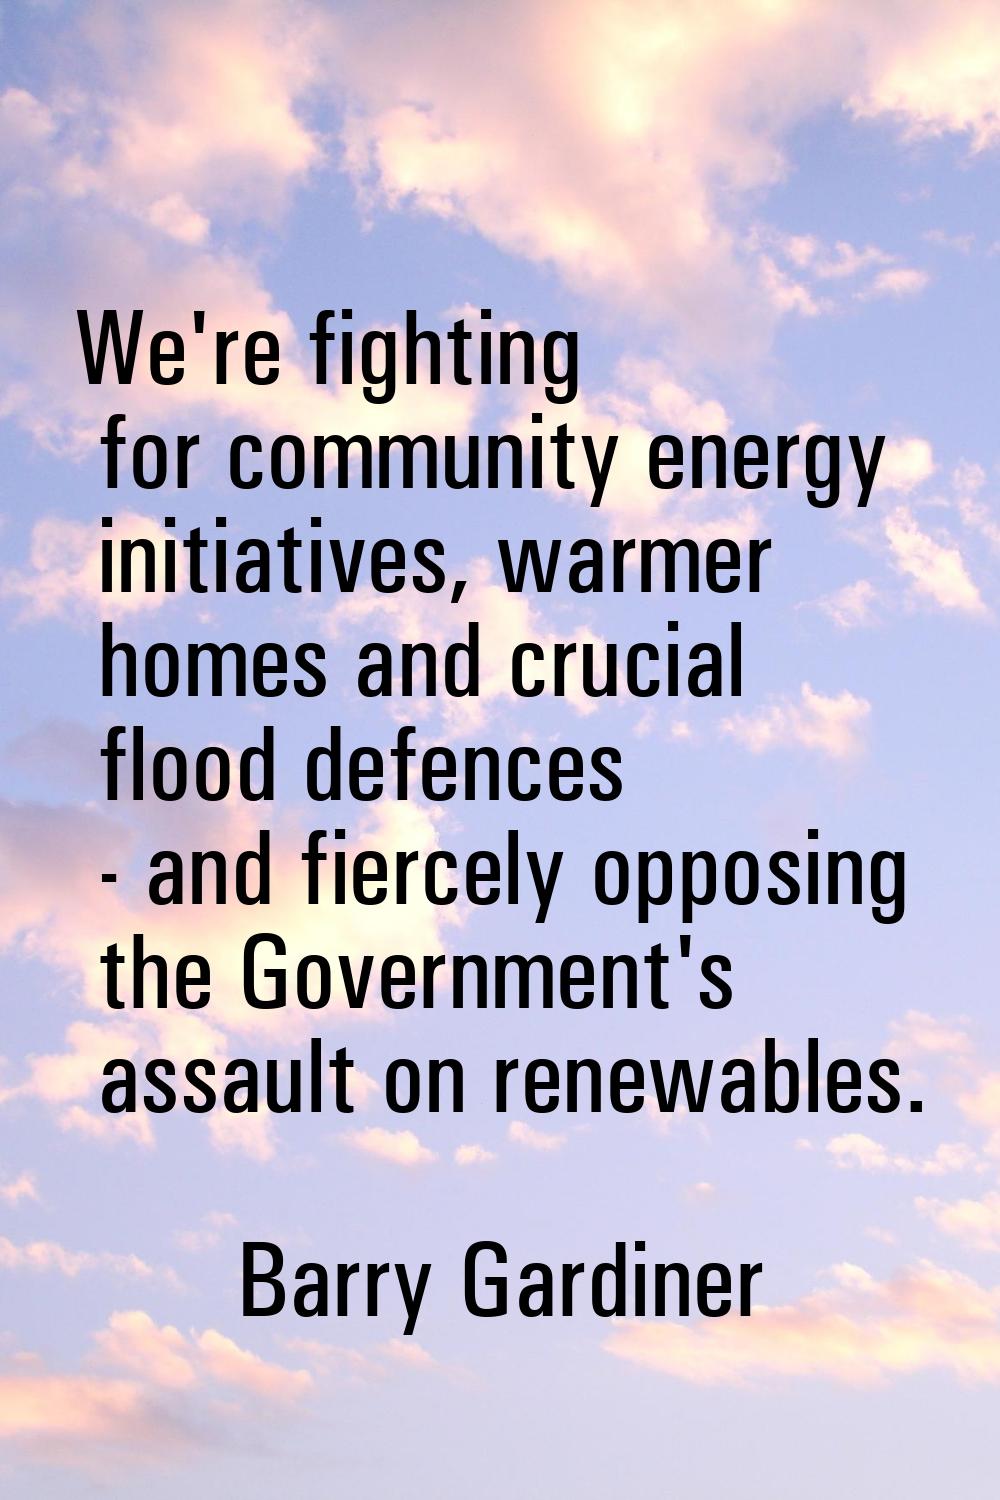 We're fighting for community energy initiatives, warmer homes and crucial flood defences - and fier